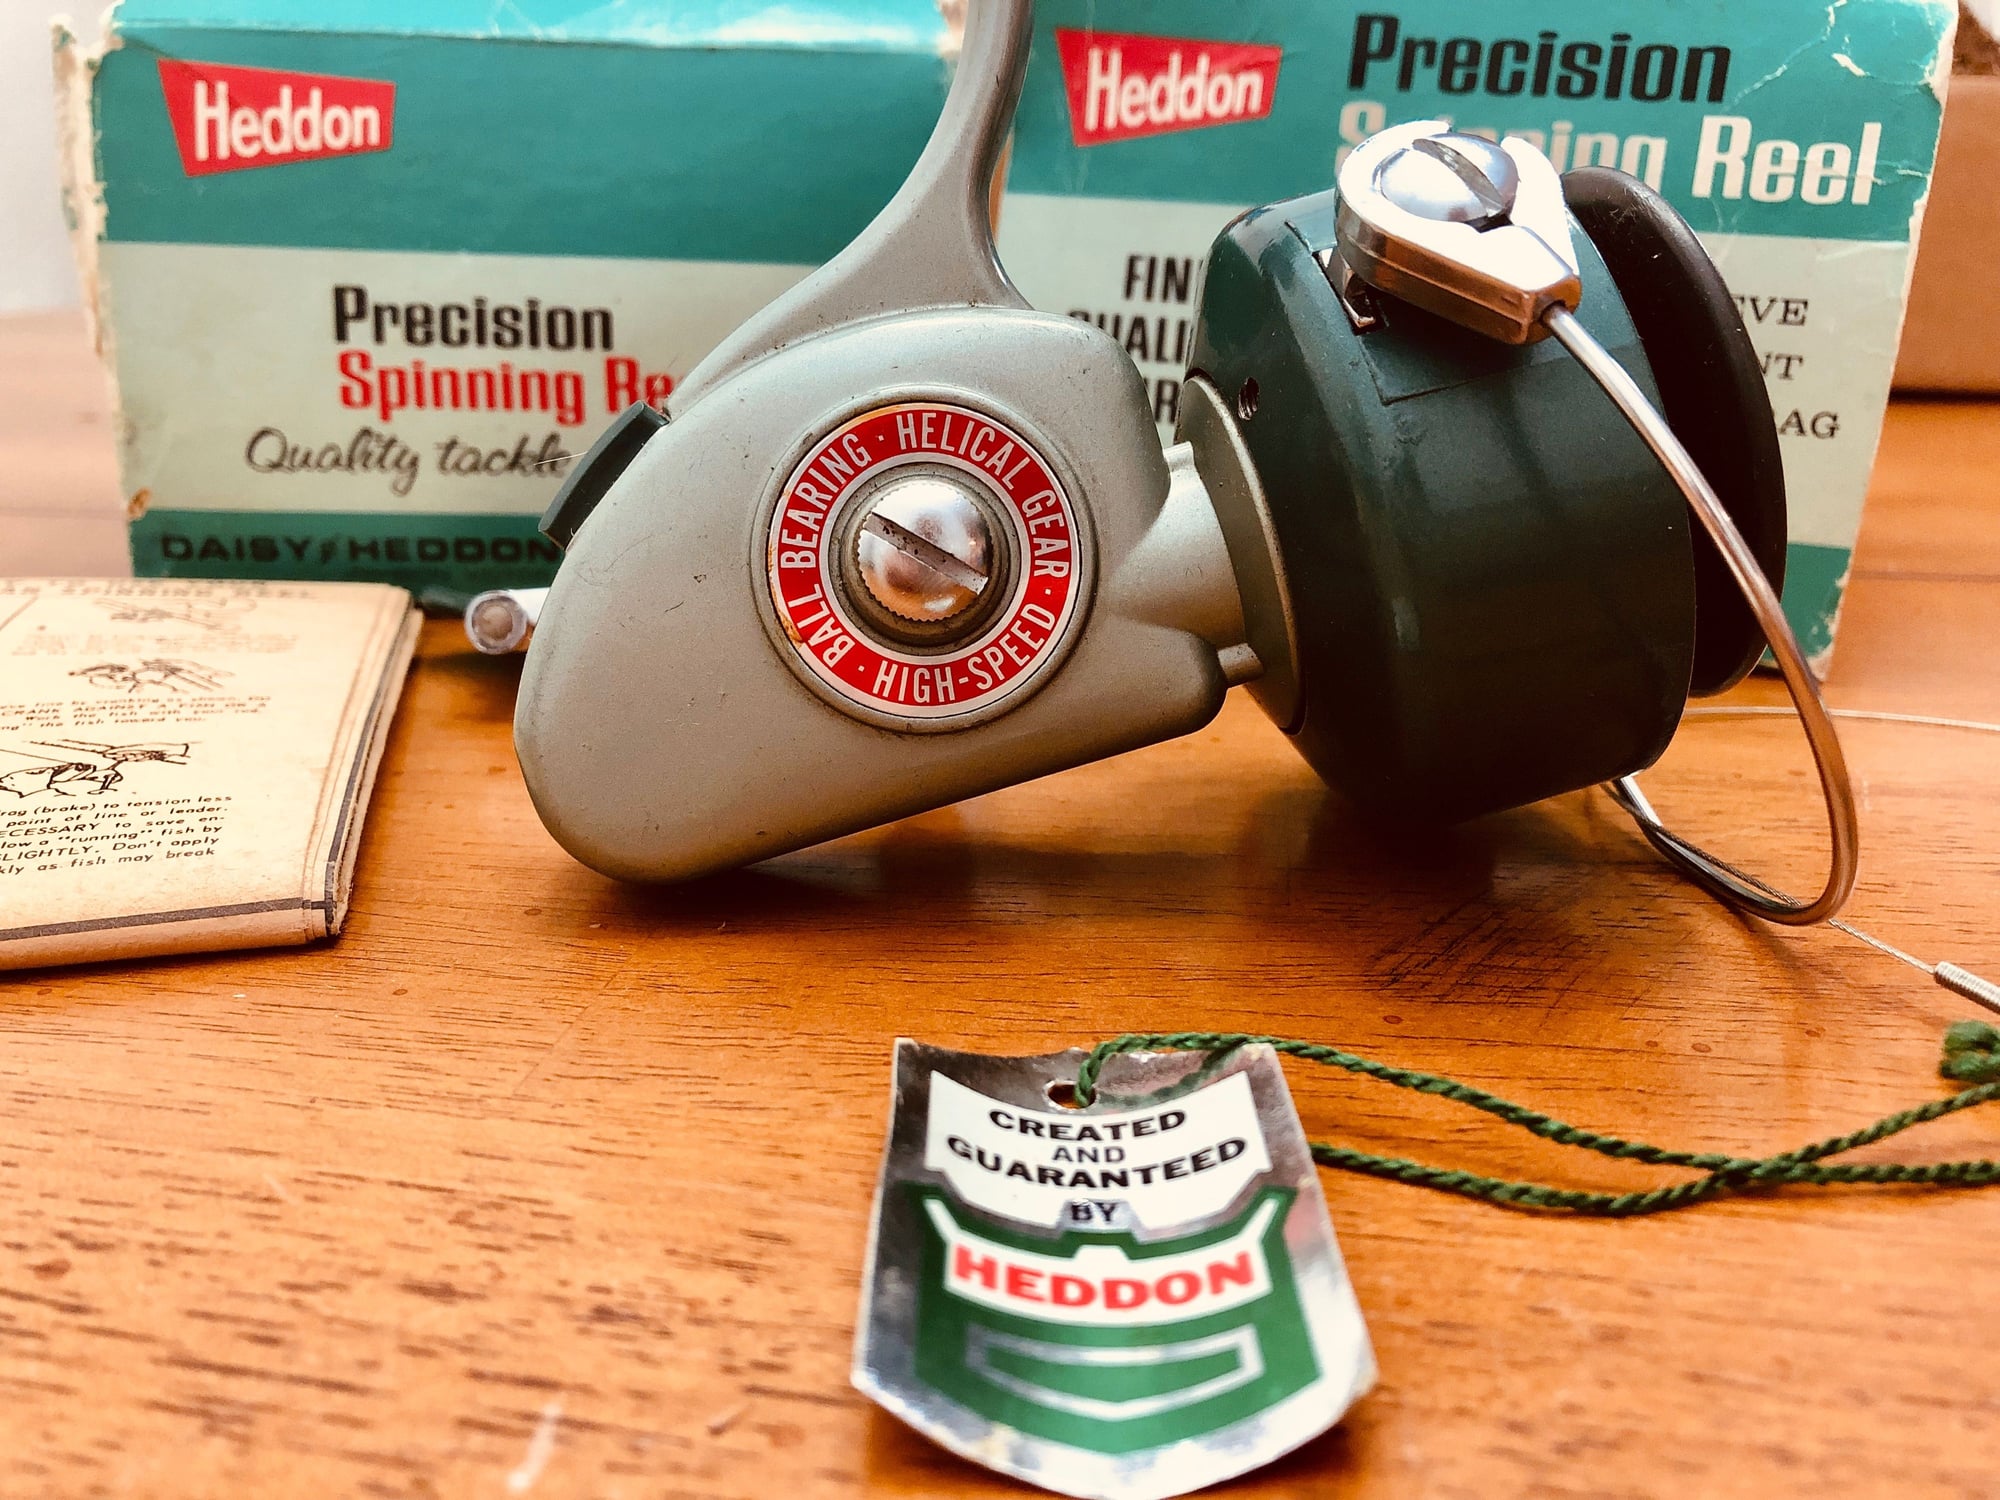 NIB Vintage Heddon Precision 246 Spinning Reel - The Hull Truth - Boating  and Fishing Forum